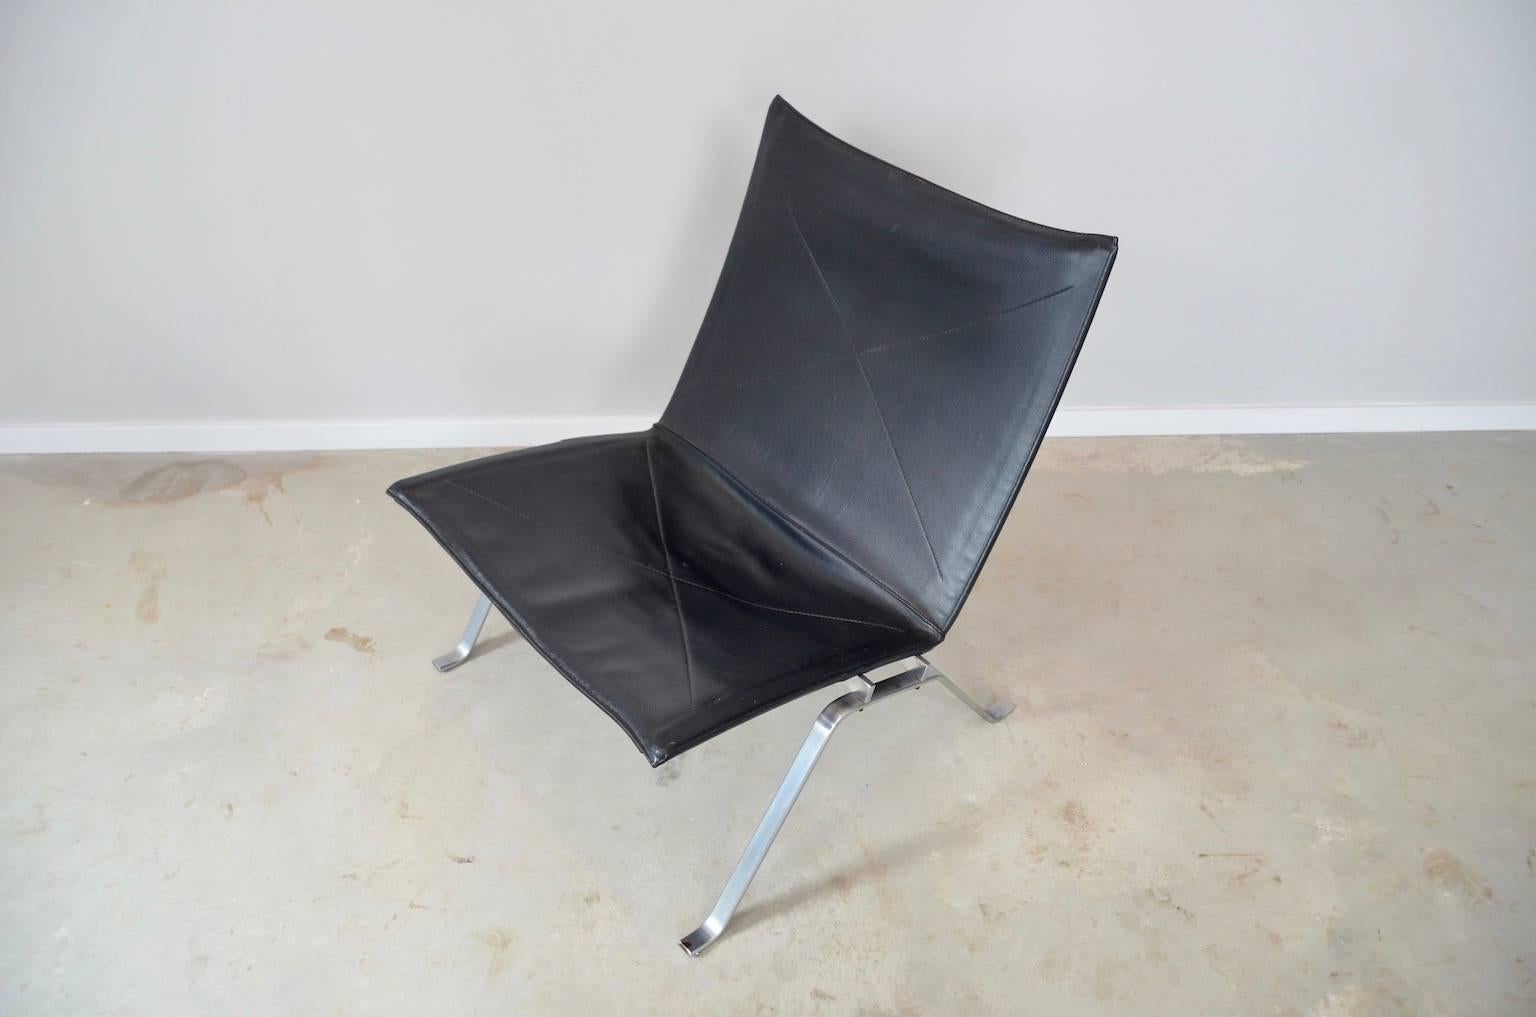 The PK22 lounge chair was an immediate success at the introduction in 1956. The chair embodies Poul Kjaerholm's search for the ideal balance between form and function. The chair was produced by E. Kold Christensen until 1982. This chair has a black